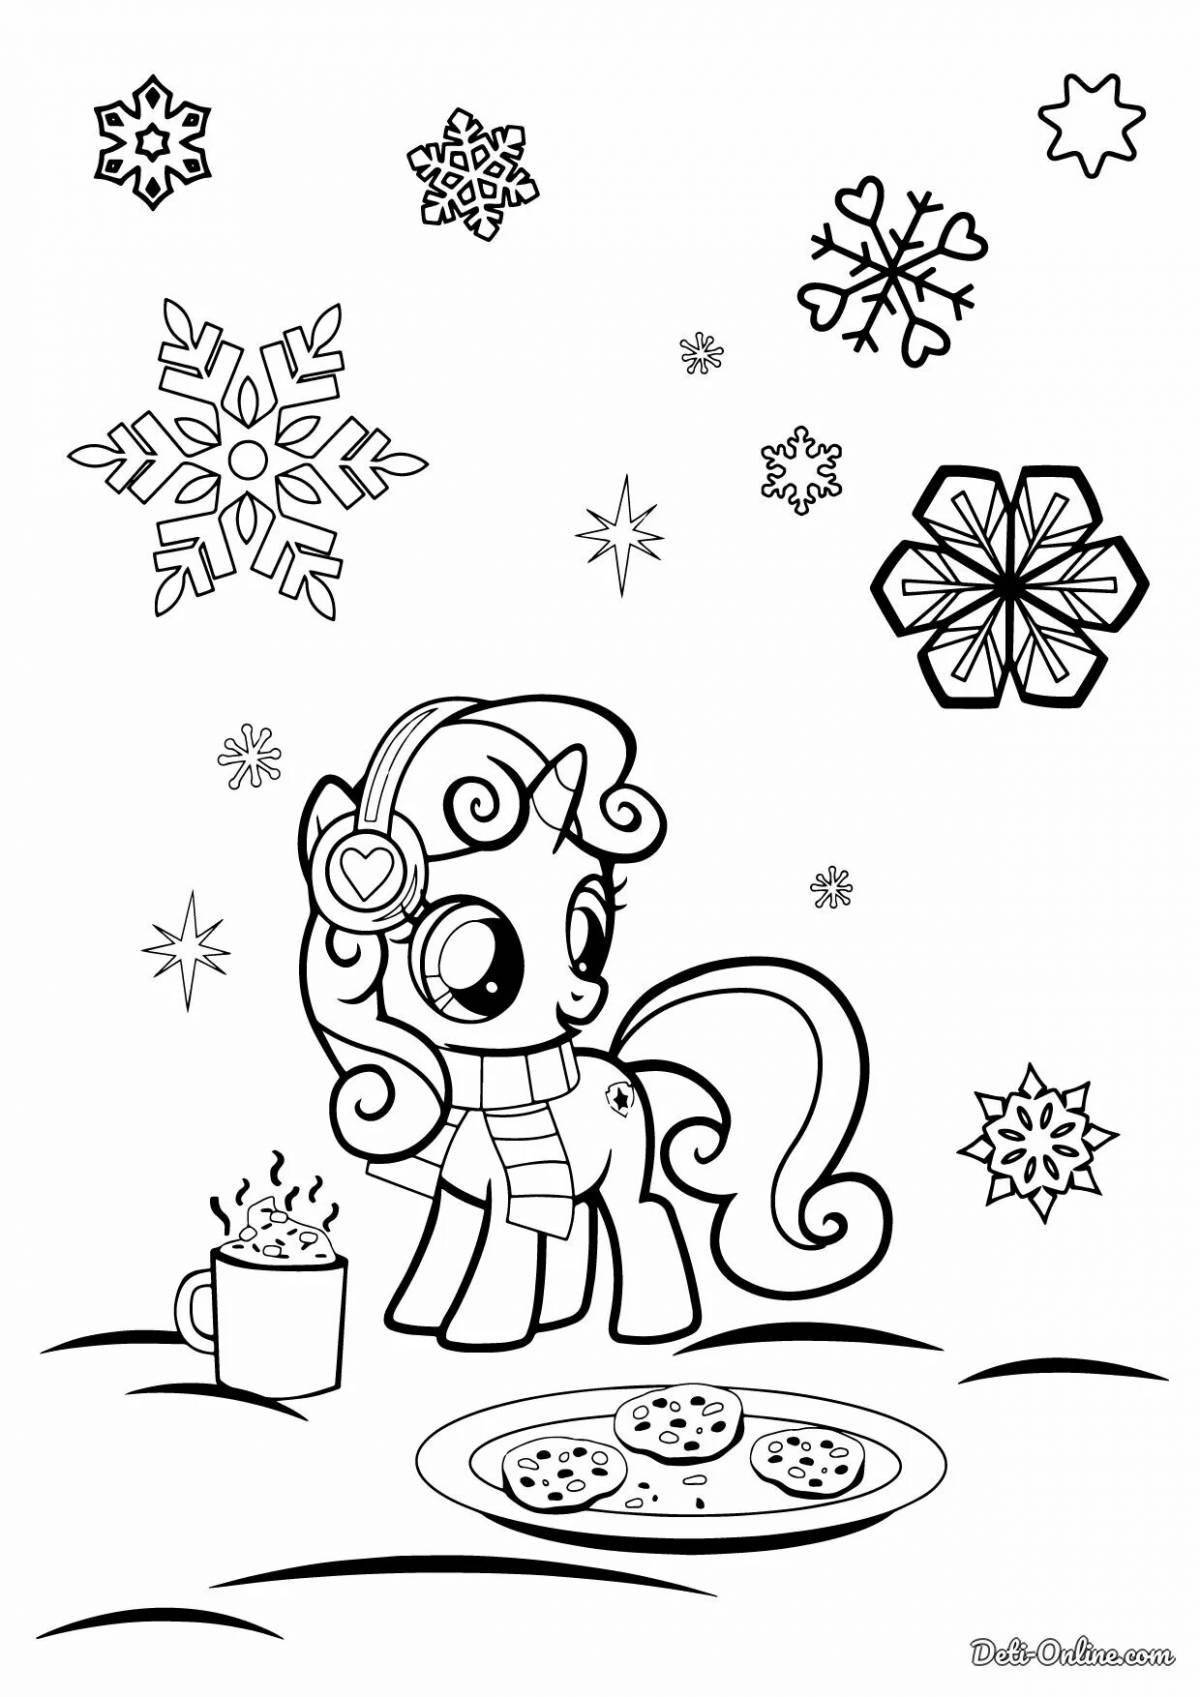 Colouring bright Christmas ponies